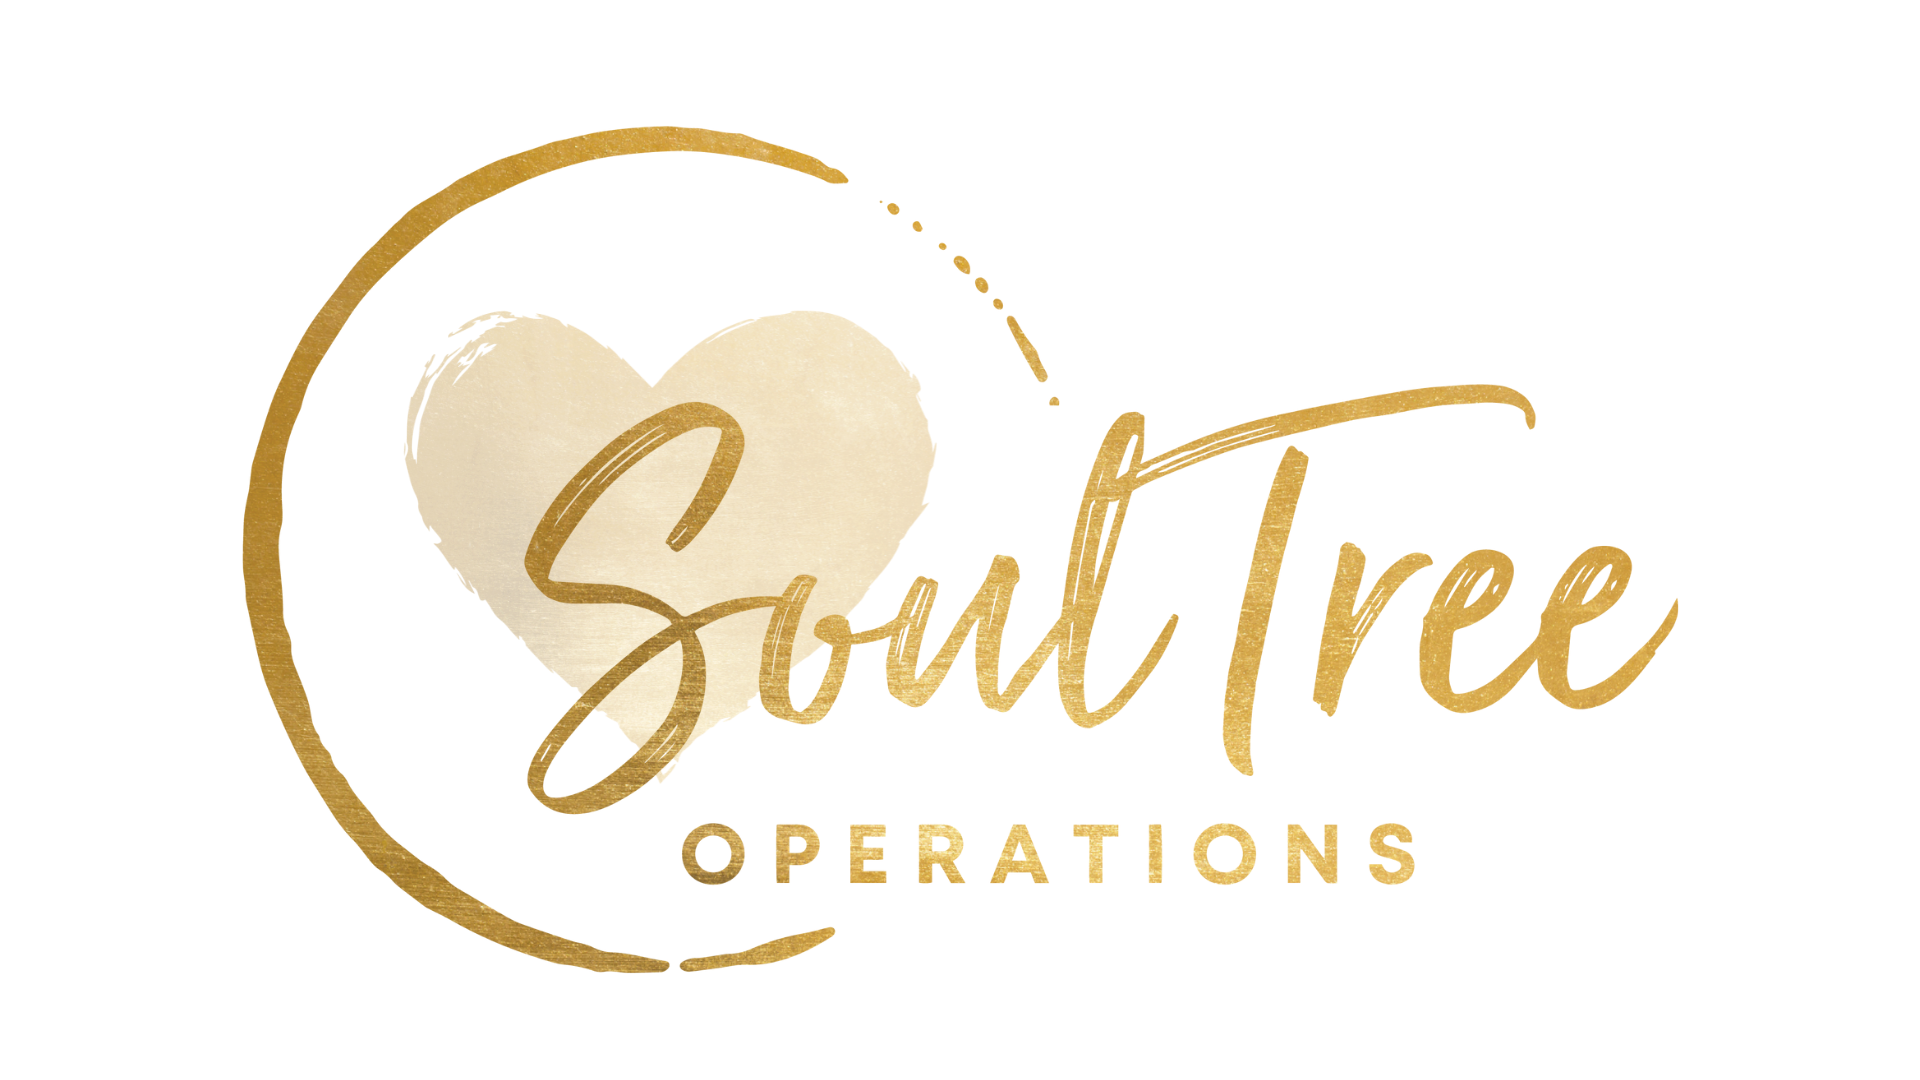 SoulTree Operations logo